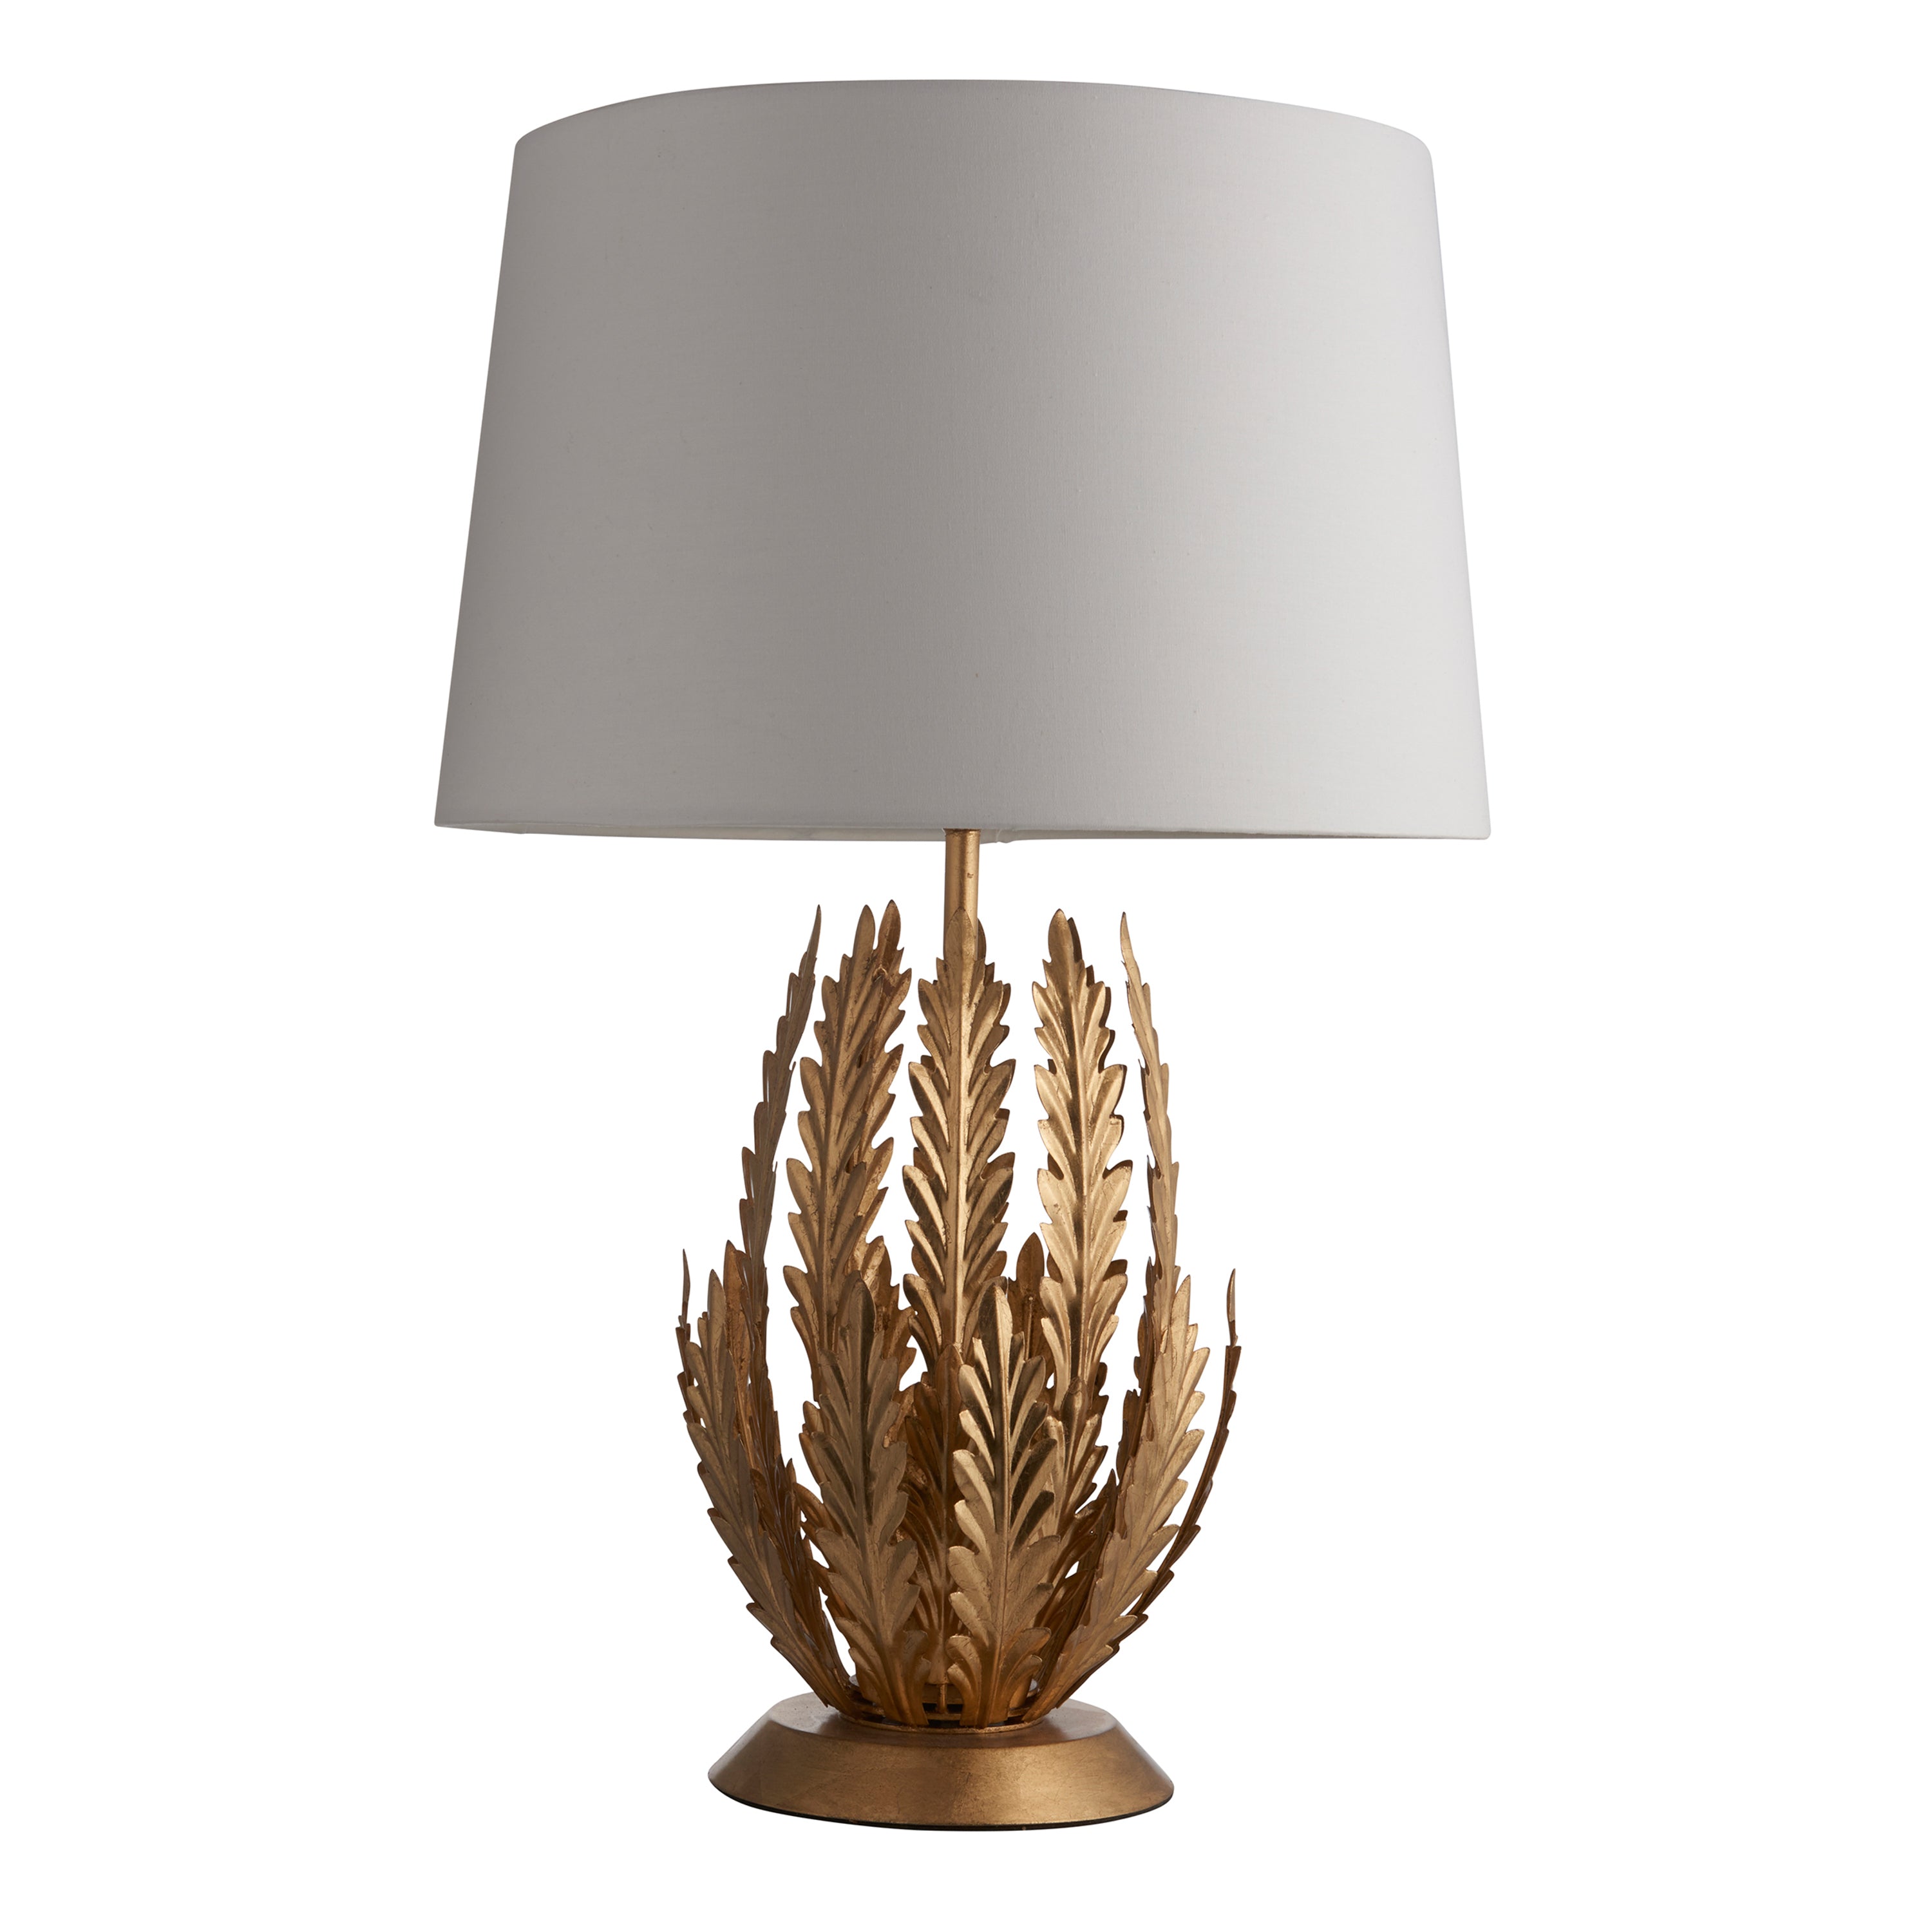 The Athenian Gold Table Lamp